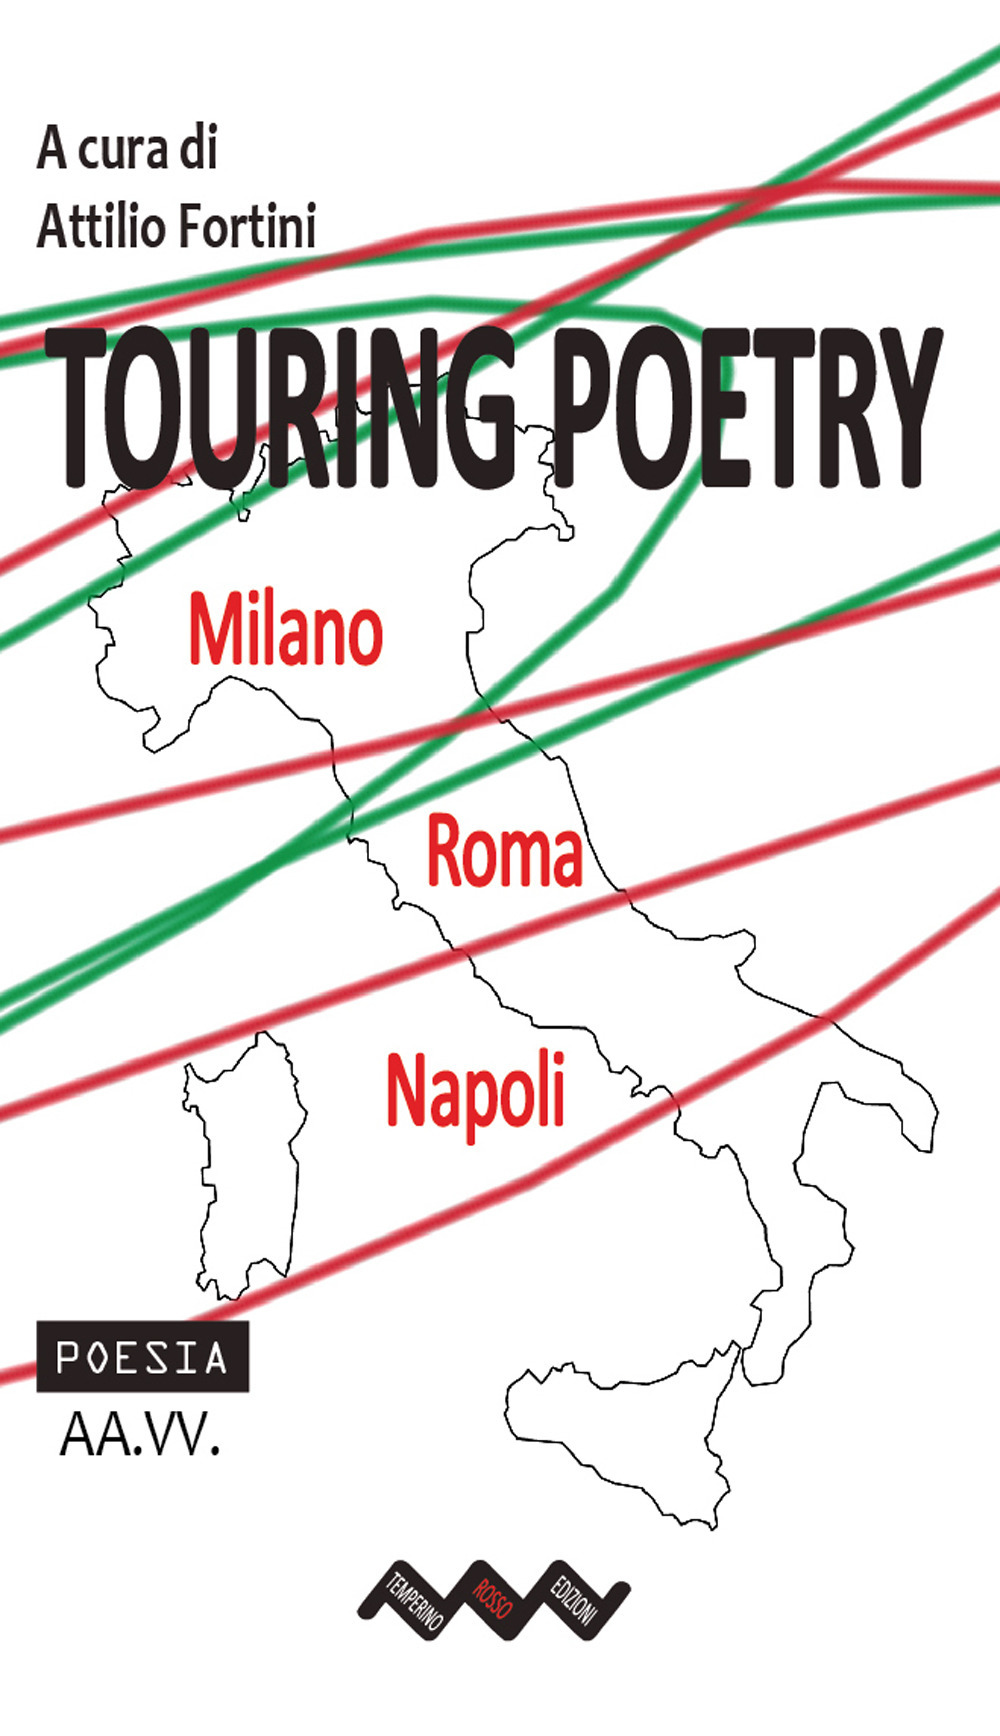 Image of Touring poetry